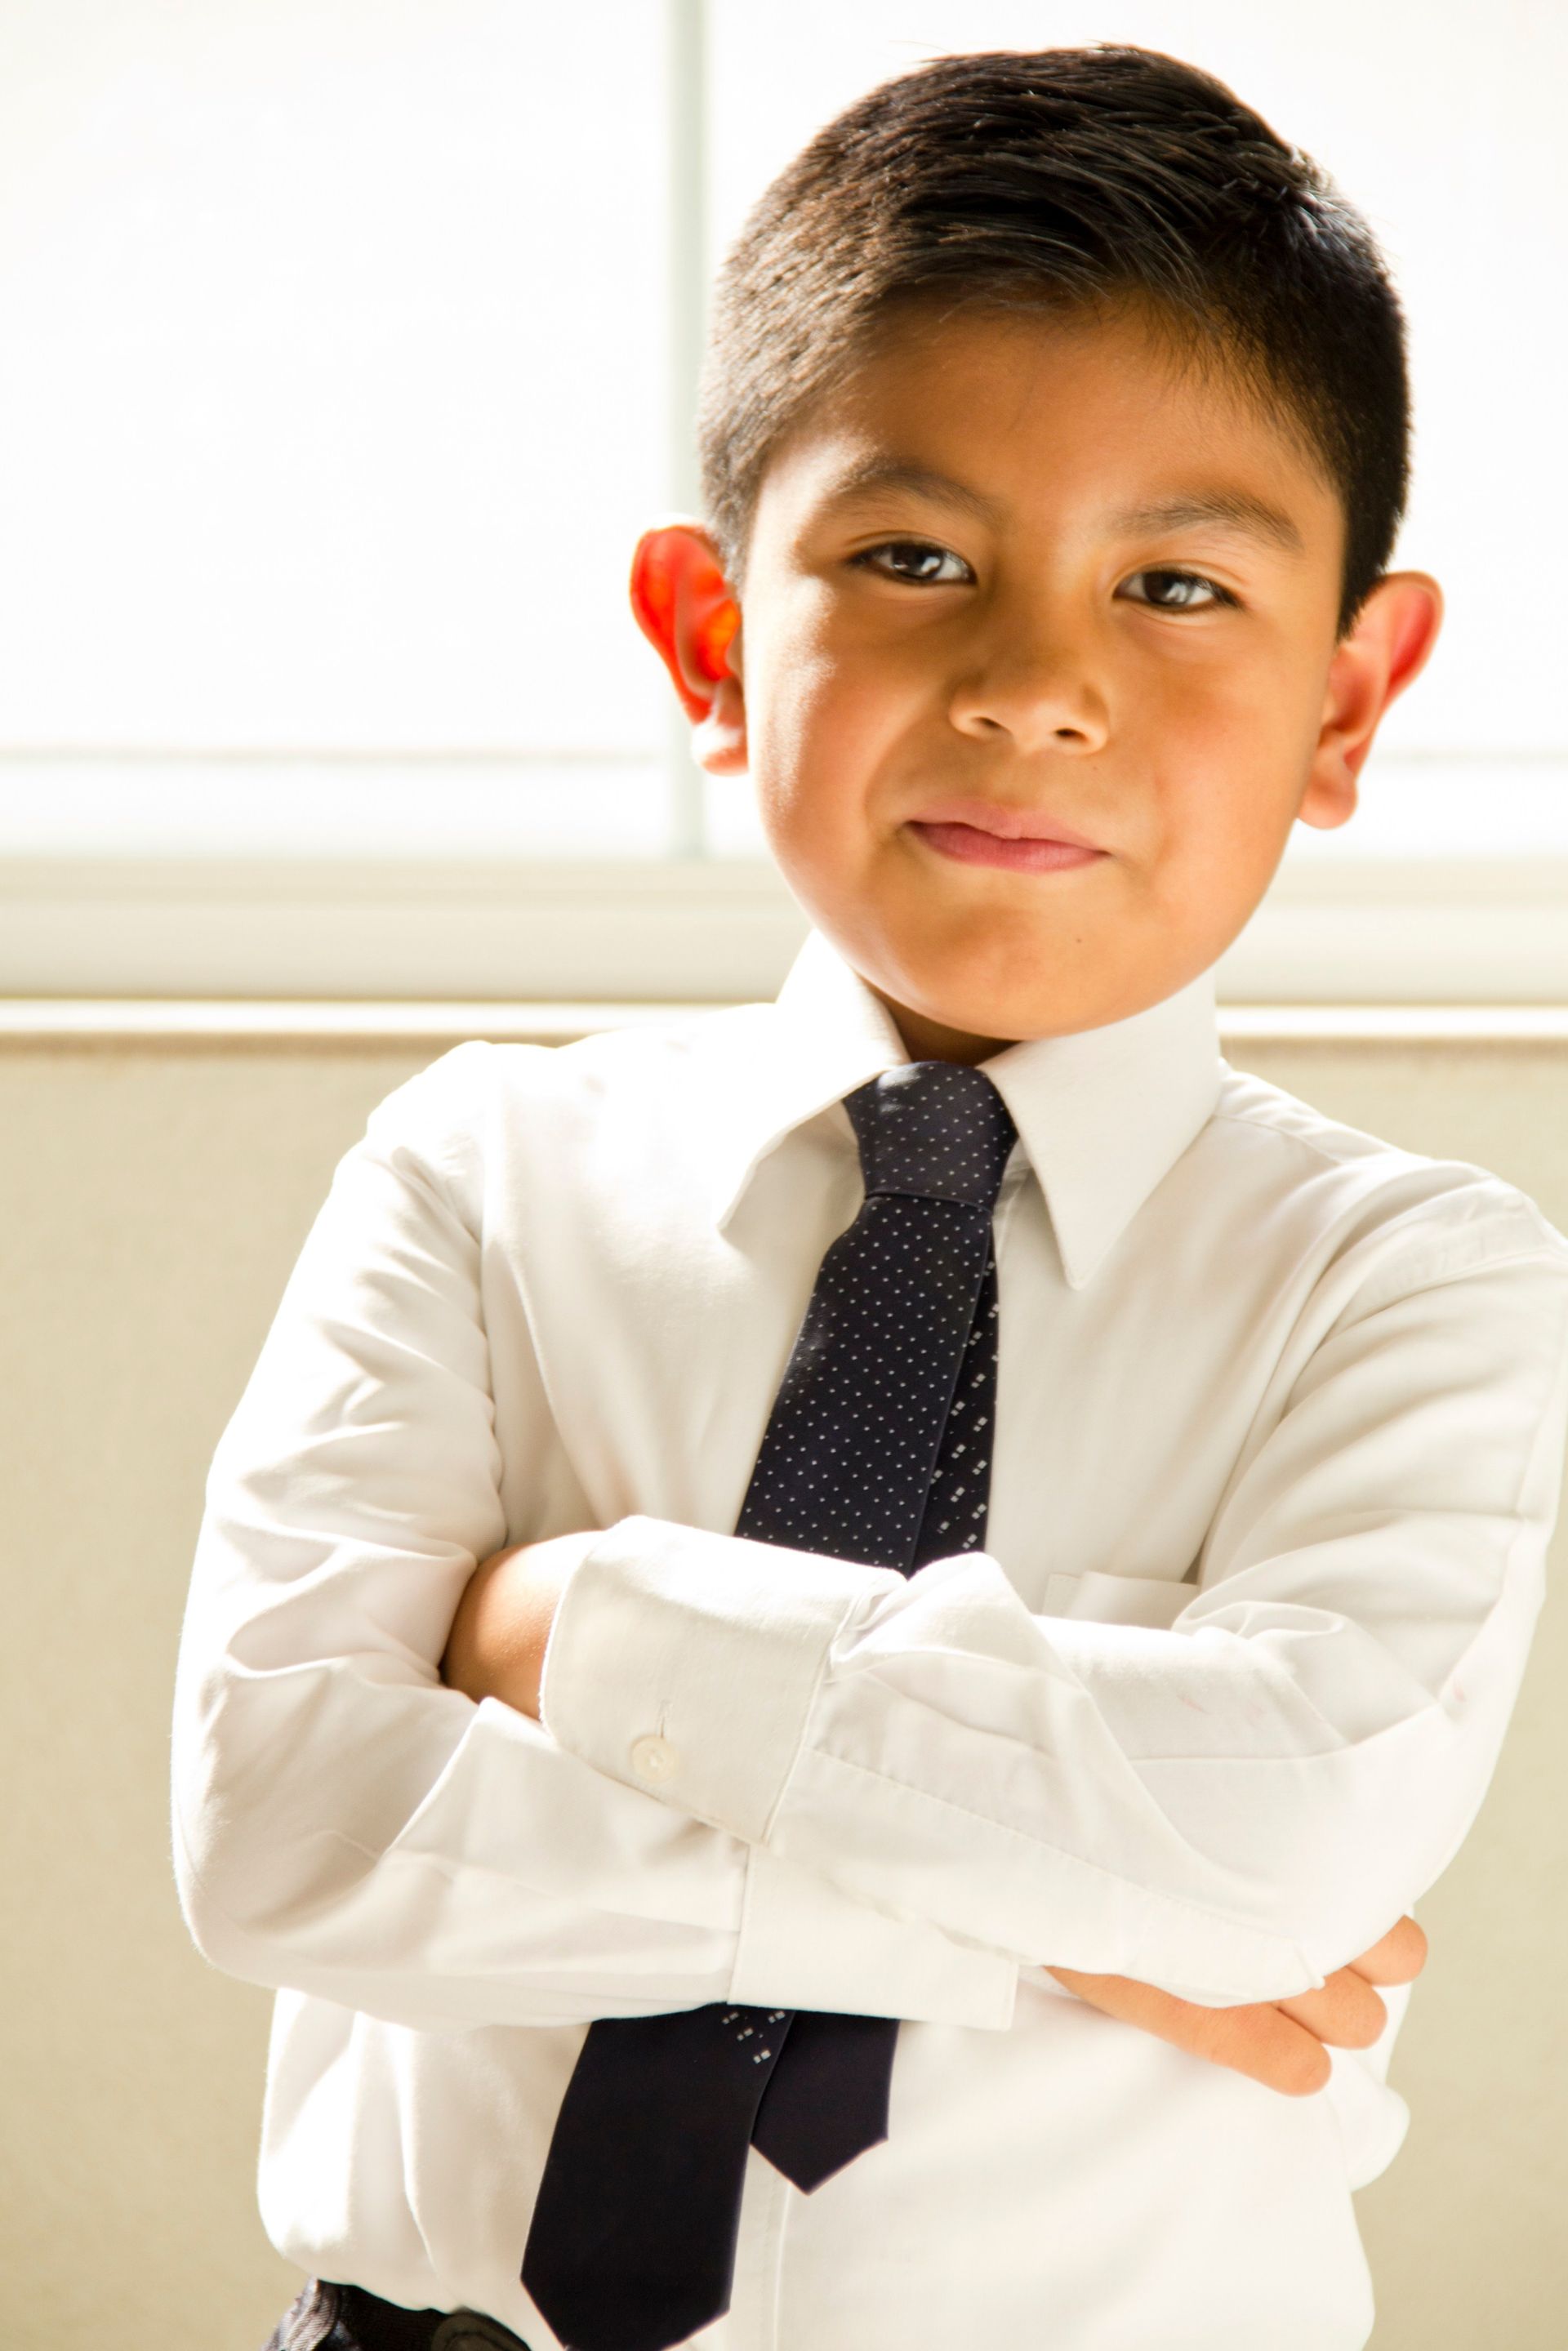 A portrait of a young boy folding his arms at church.